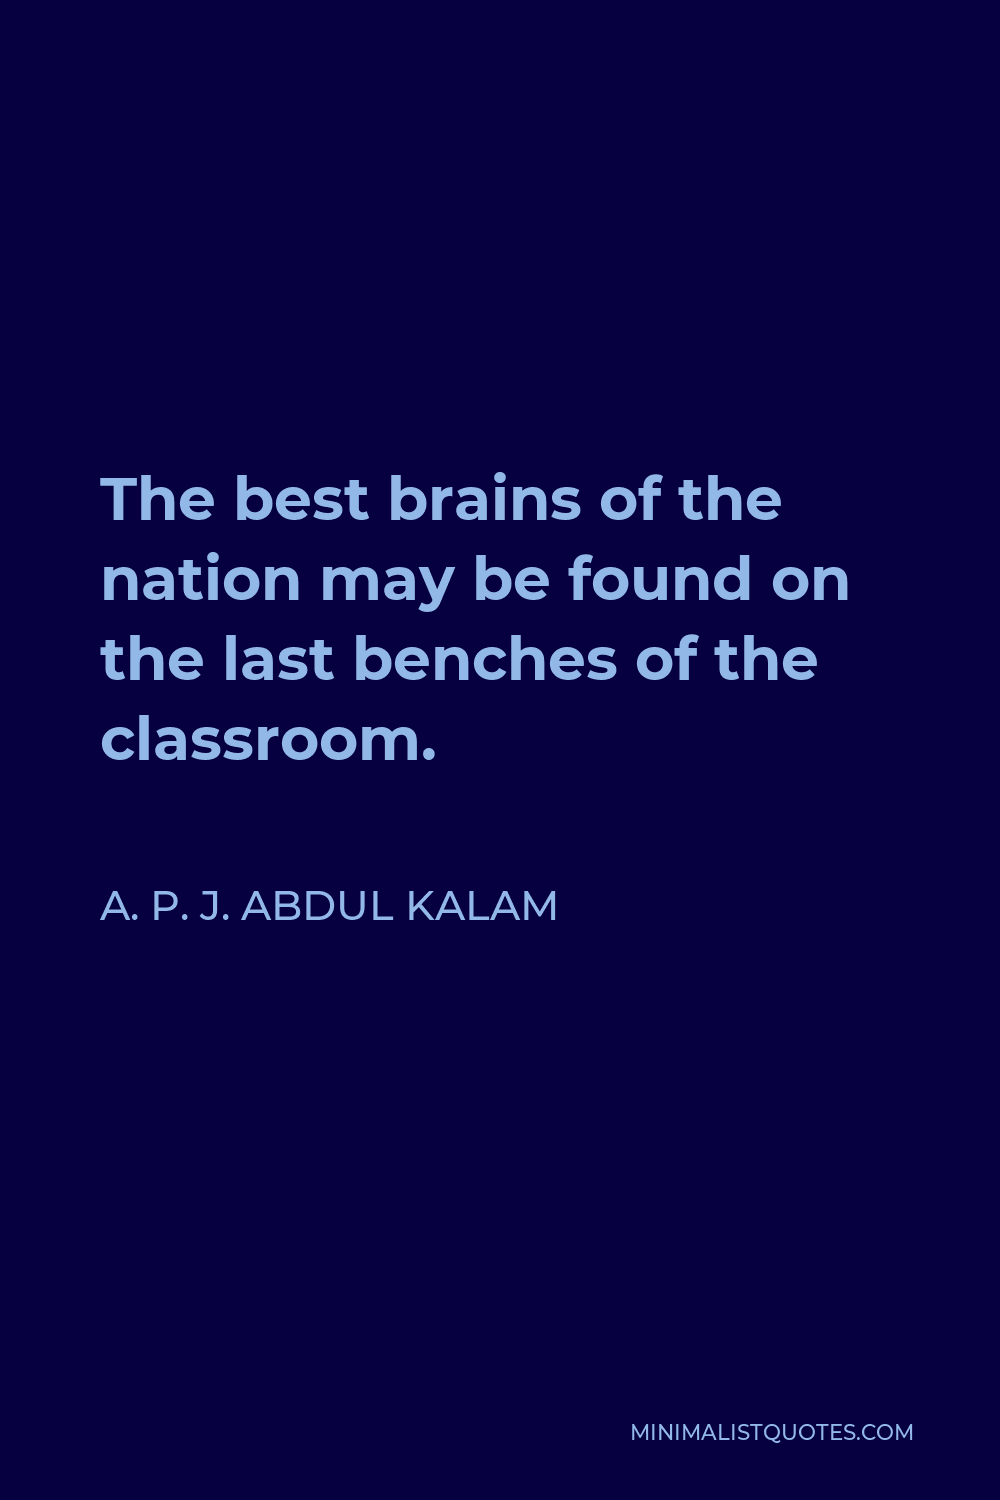 A. P. J. Abdul Kalam Quote - The best brains of the nation may be found on the last benches of the classroom.